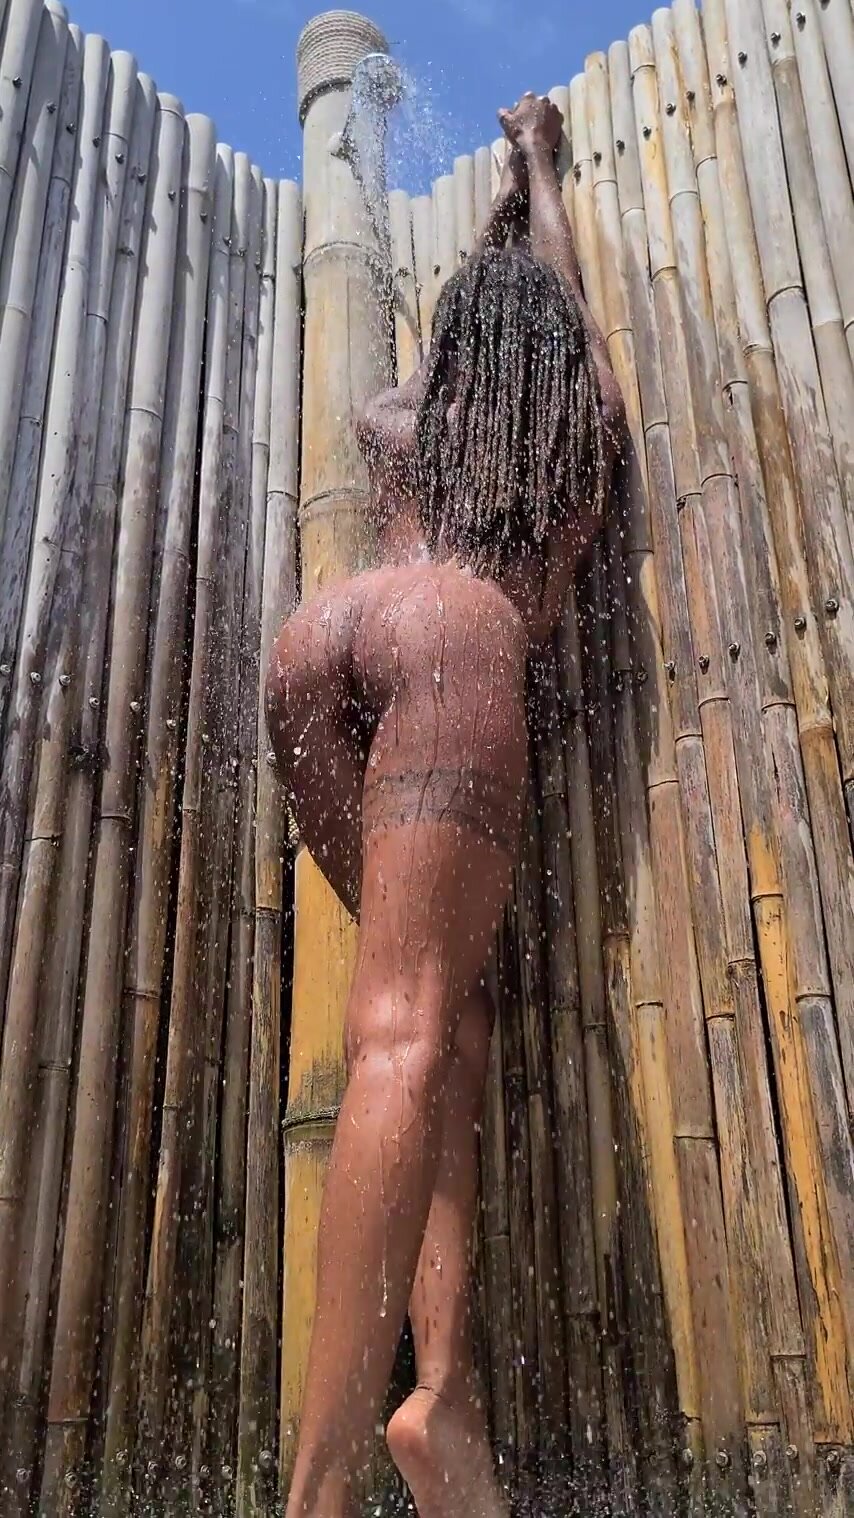 Breed my holes while I take a cold outdoor shower in the tropical heat